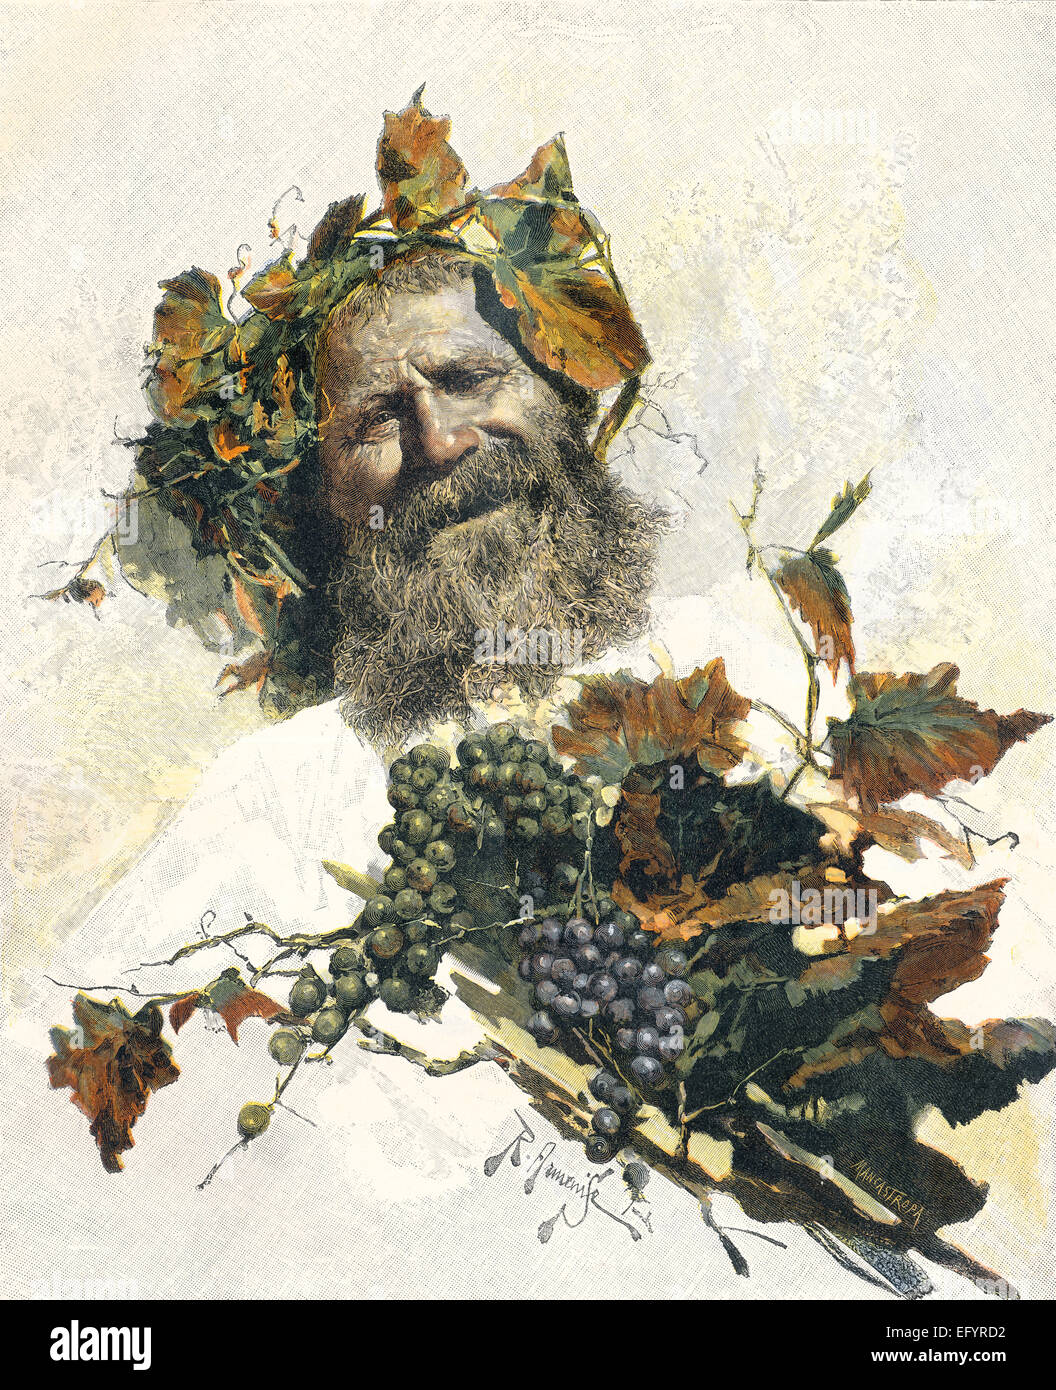 Bacchus, c. 1895, by Armenise, Stock Photo